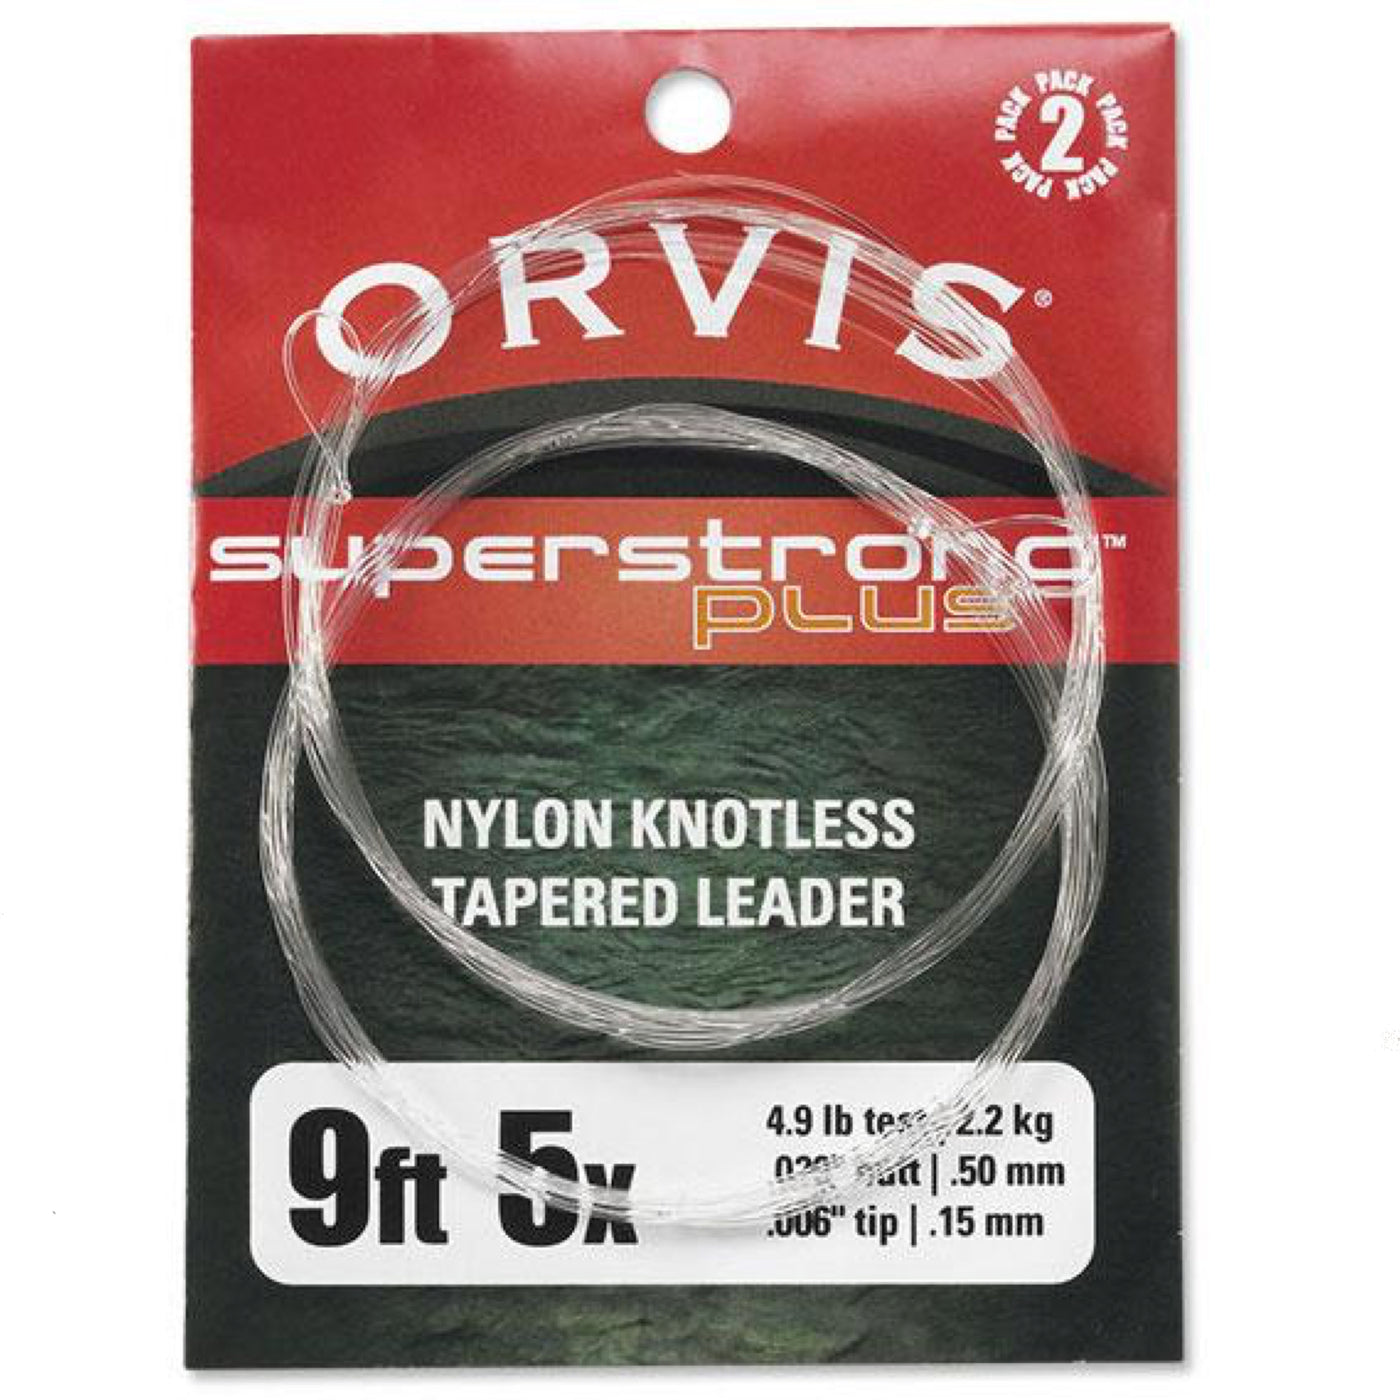 Orvis Superstrong Plus Leaders 9' 0x